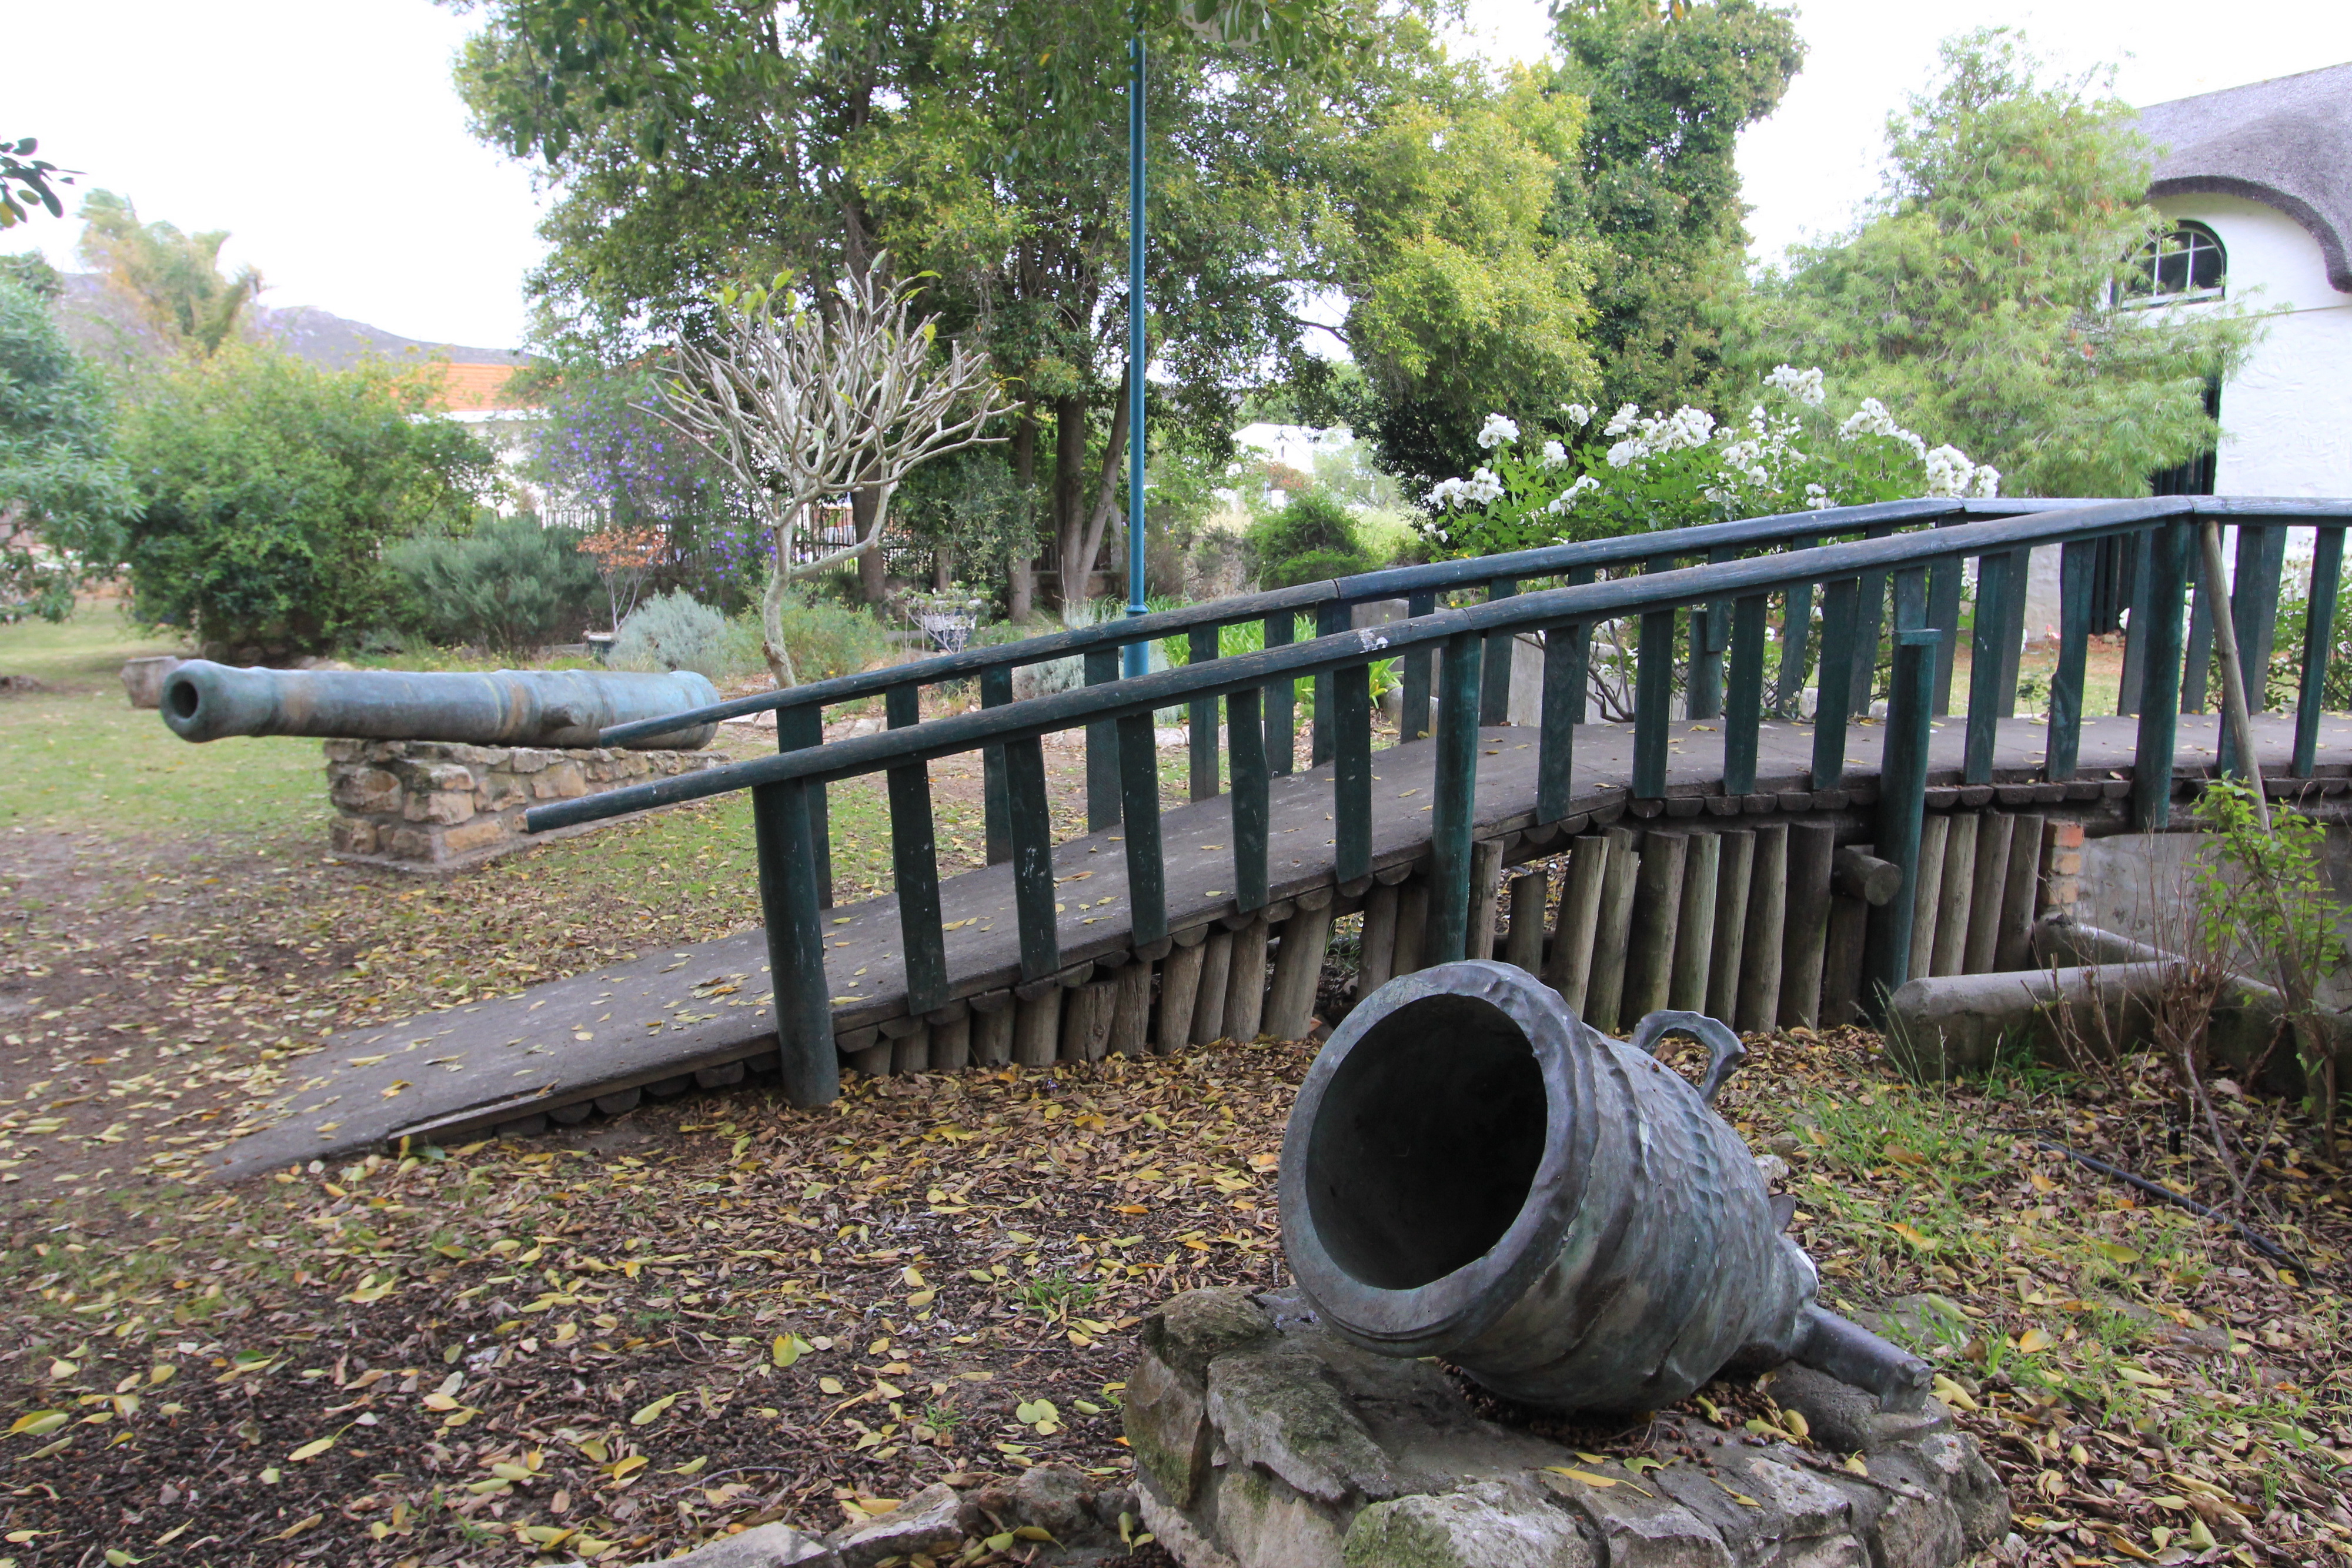 In the gardens of the Shipwreck Museum, you’ll find old cannons and massive anchors. Photographer: Chris Marais